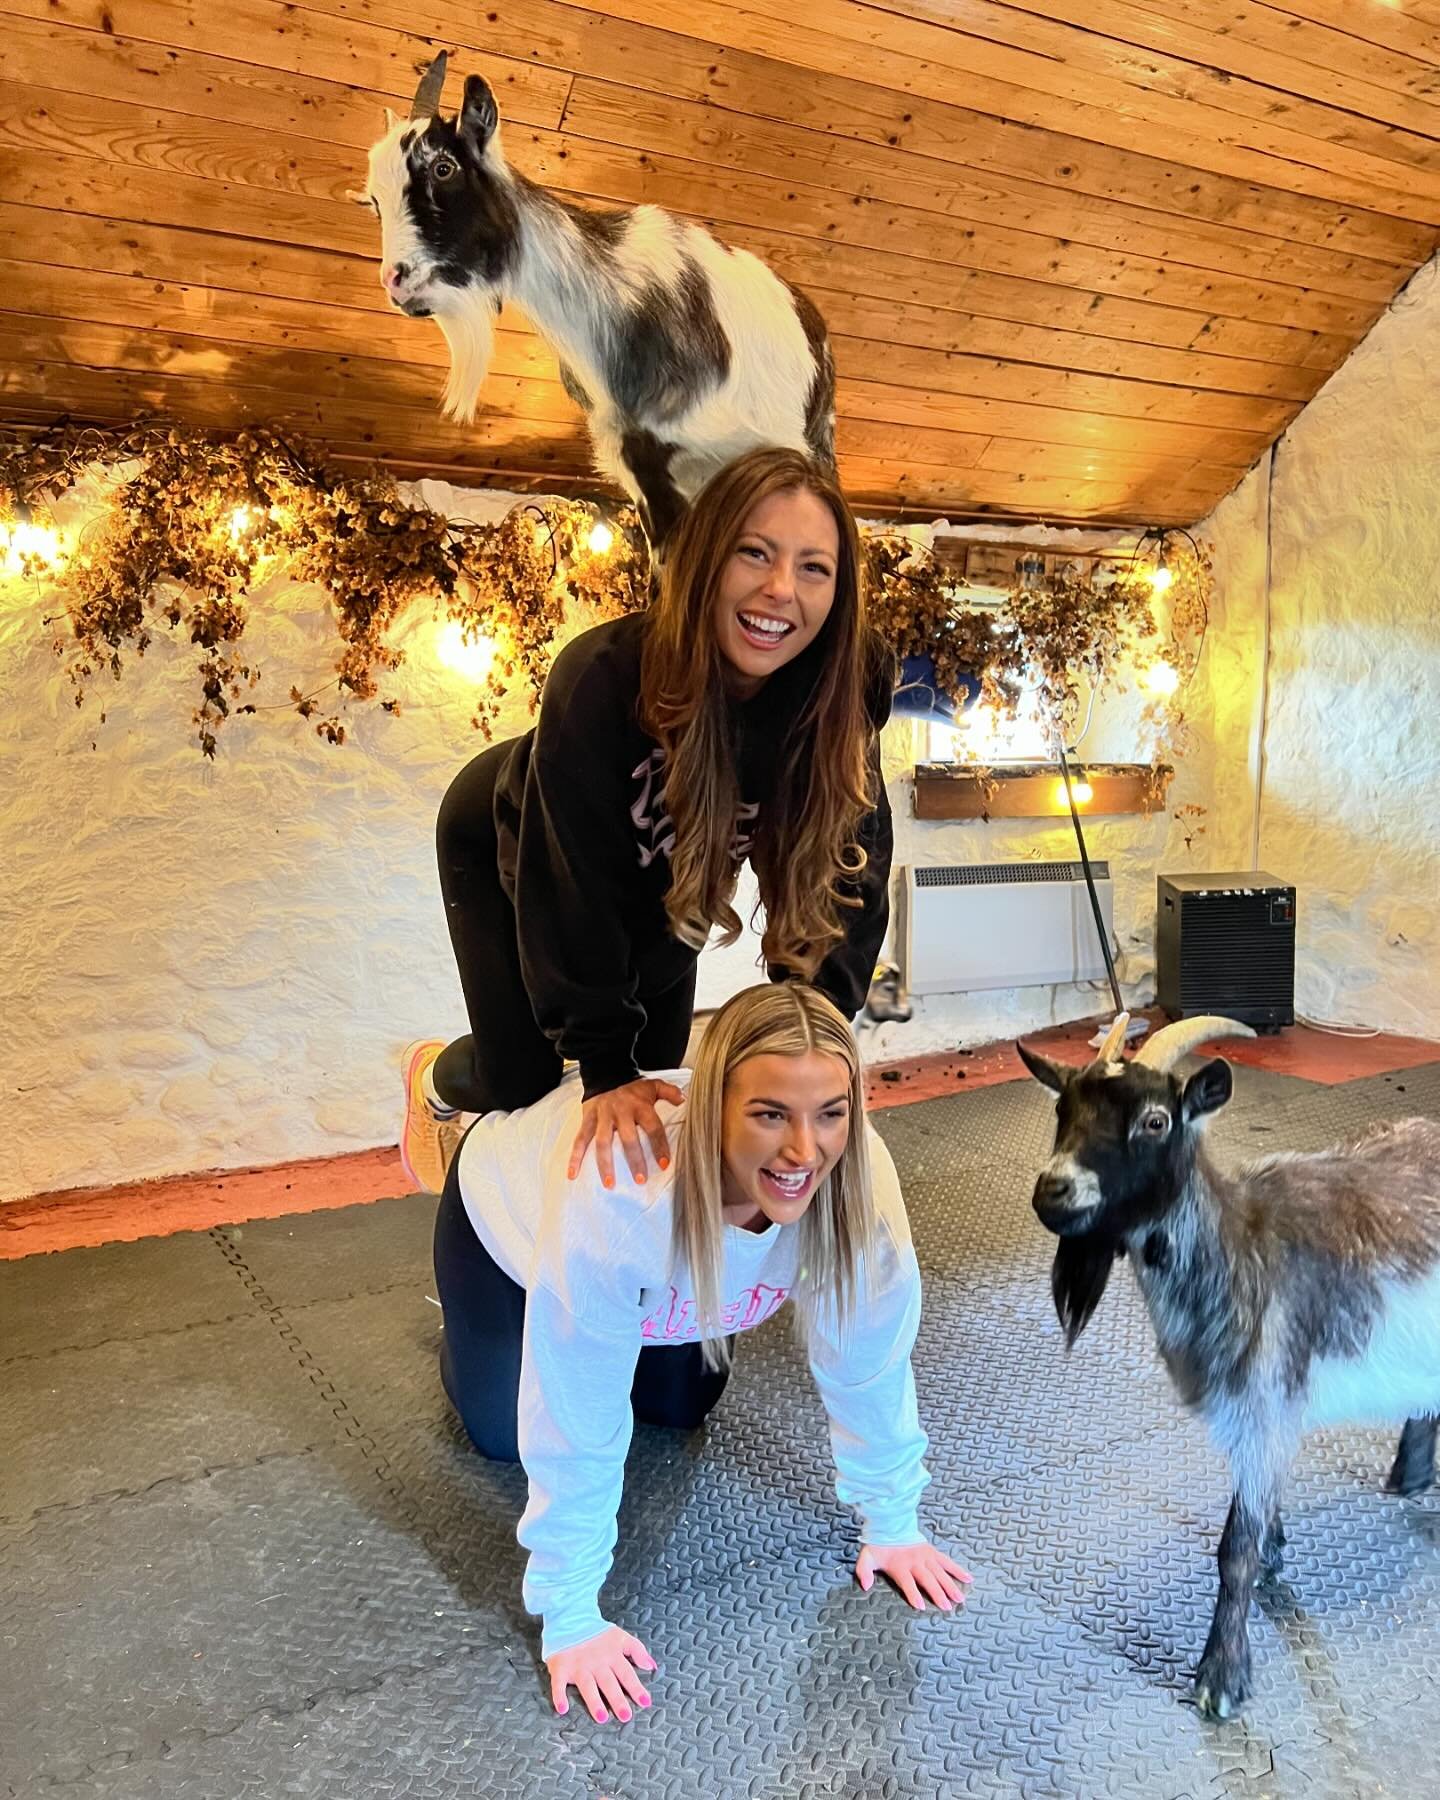 Our May dates are nearly sold out, grab the last spots quick!
May 12th 12pm sold out
May 12th 2pm 3 spaces
May 26th 12pm sold out
May 26th 2pm 1 space

#goats #pygmygoats #goatpilates #pygmygoatpilates #goatsofinstagram #edinburgh #edinburghpilates #